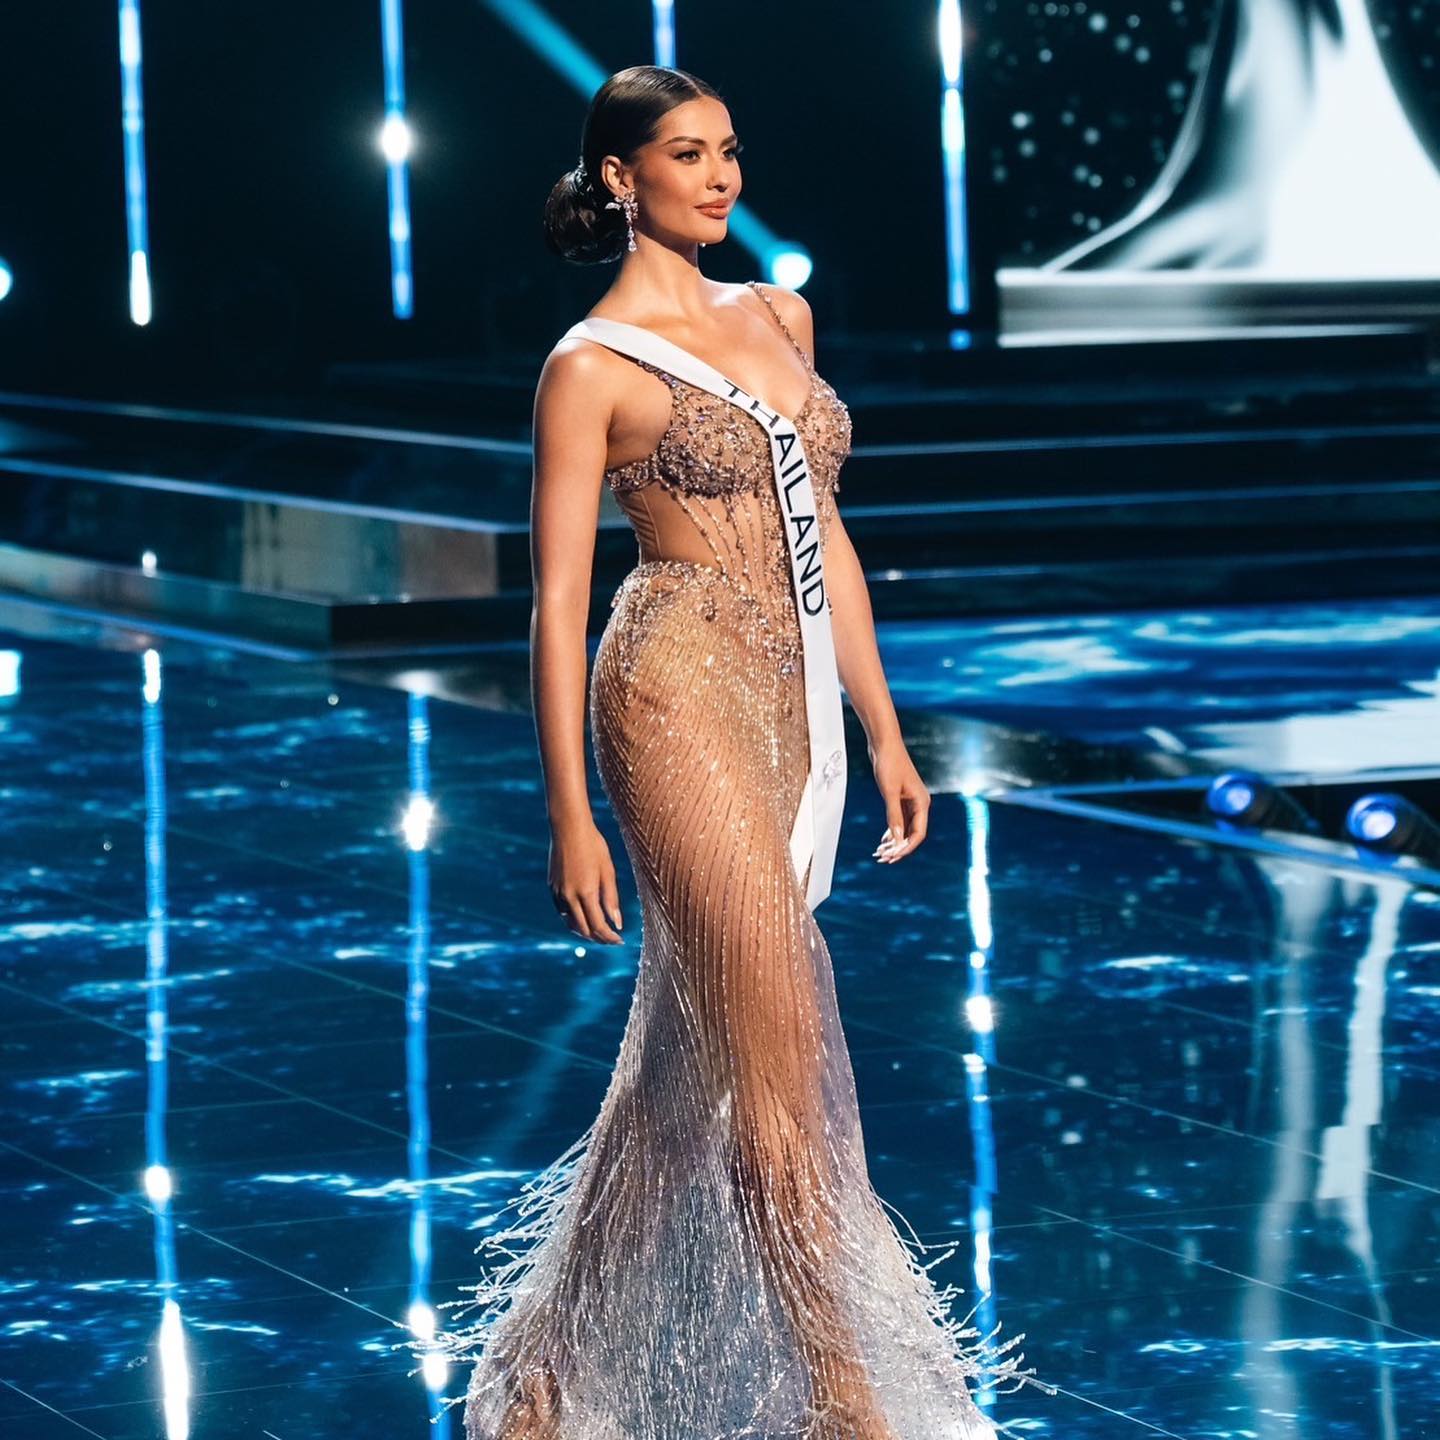 8 Anntonia Porsild Facts: Know The 1st Runner-Up In Miss Universe 2023